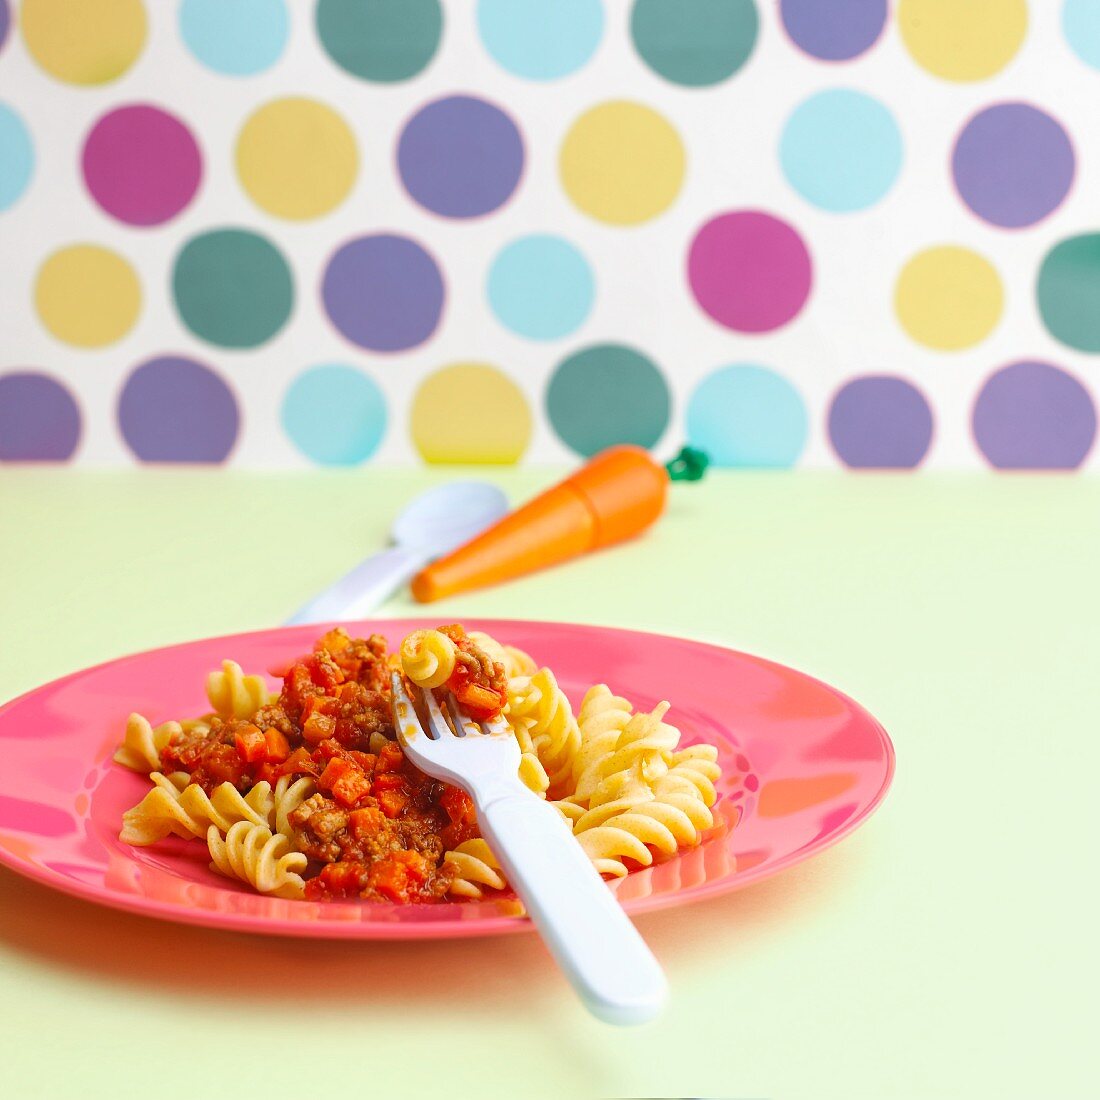 Wholemeal pasta with carrot bolognese